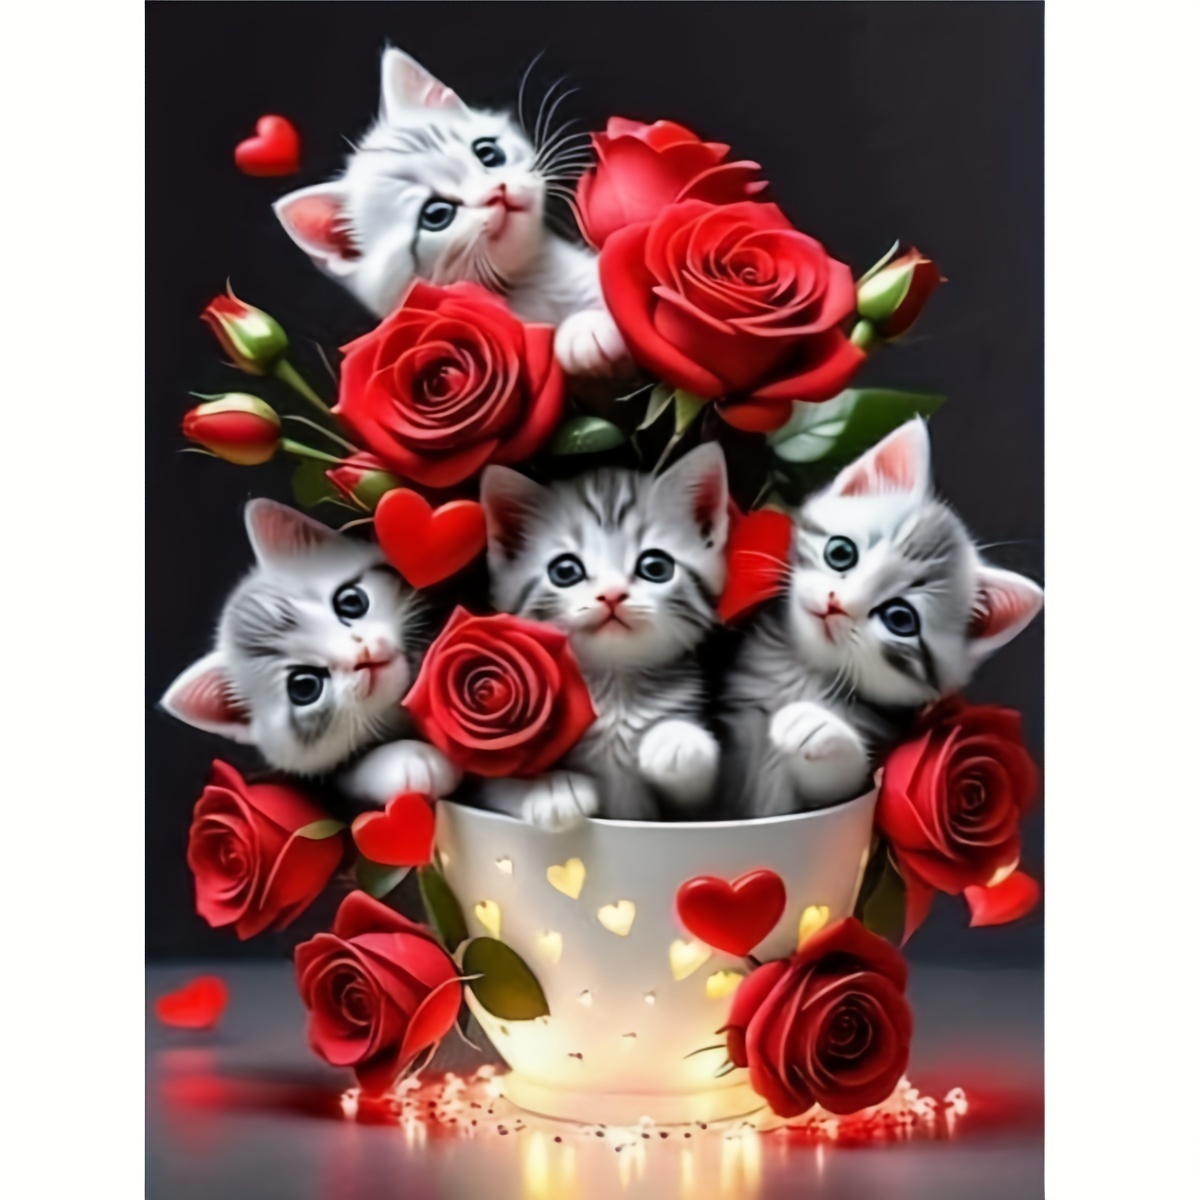 

Kitty In A Cup Diamond Painting Kit: 30 X 40cm/11.81 X 15.75in, Suitable For Beginners, Animal Theme, Round Diamond Shapes, Acrylic (pmma) Material